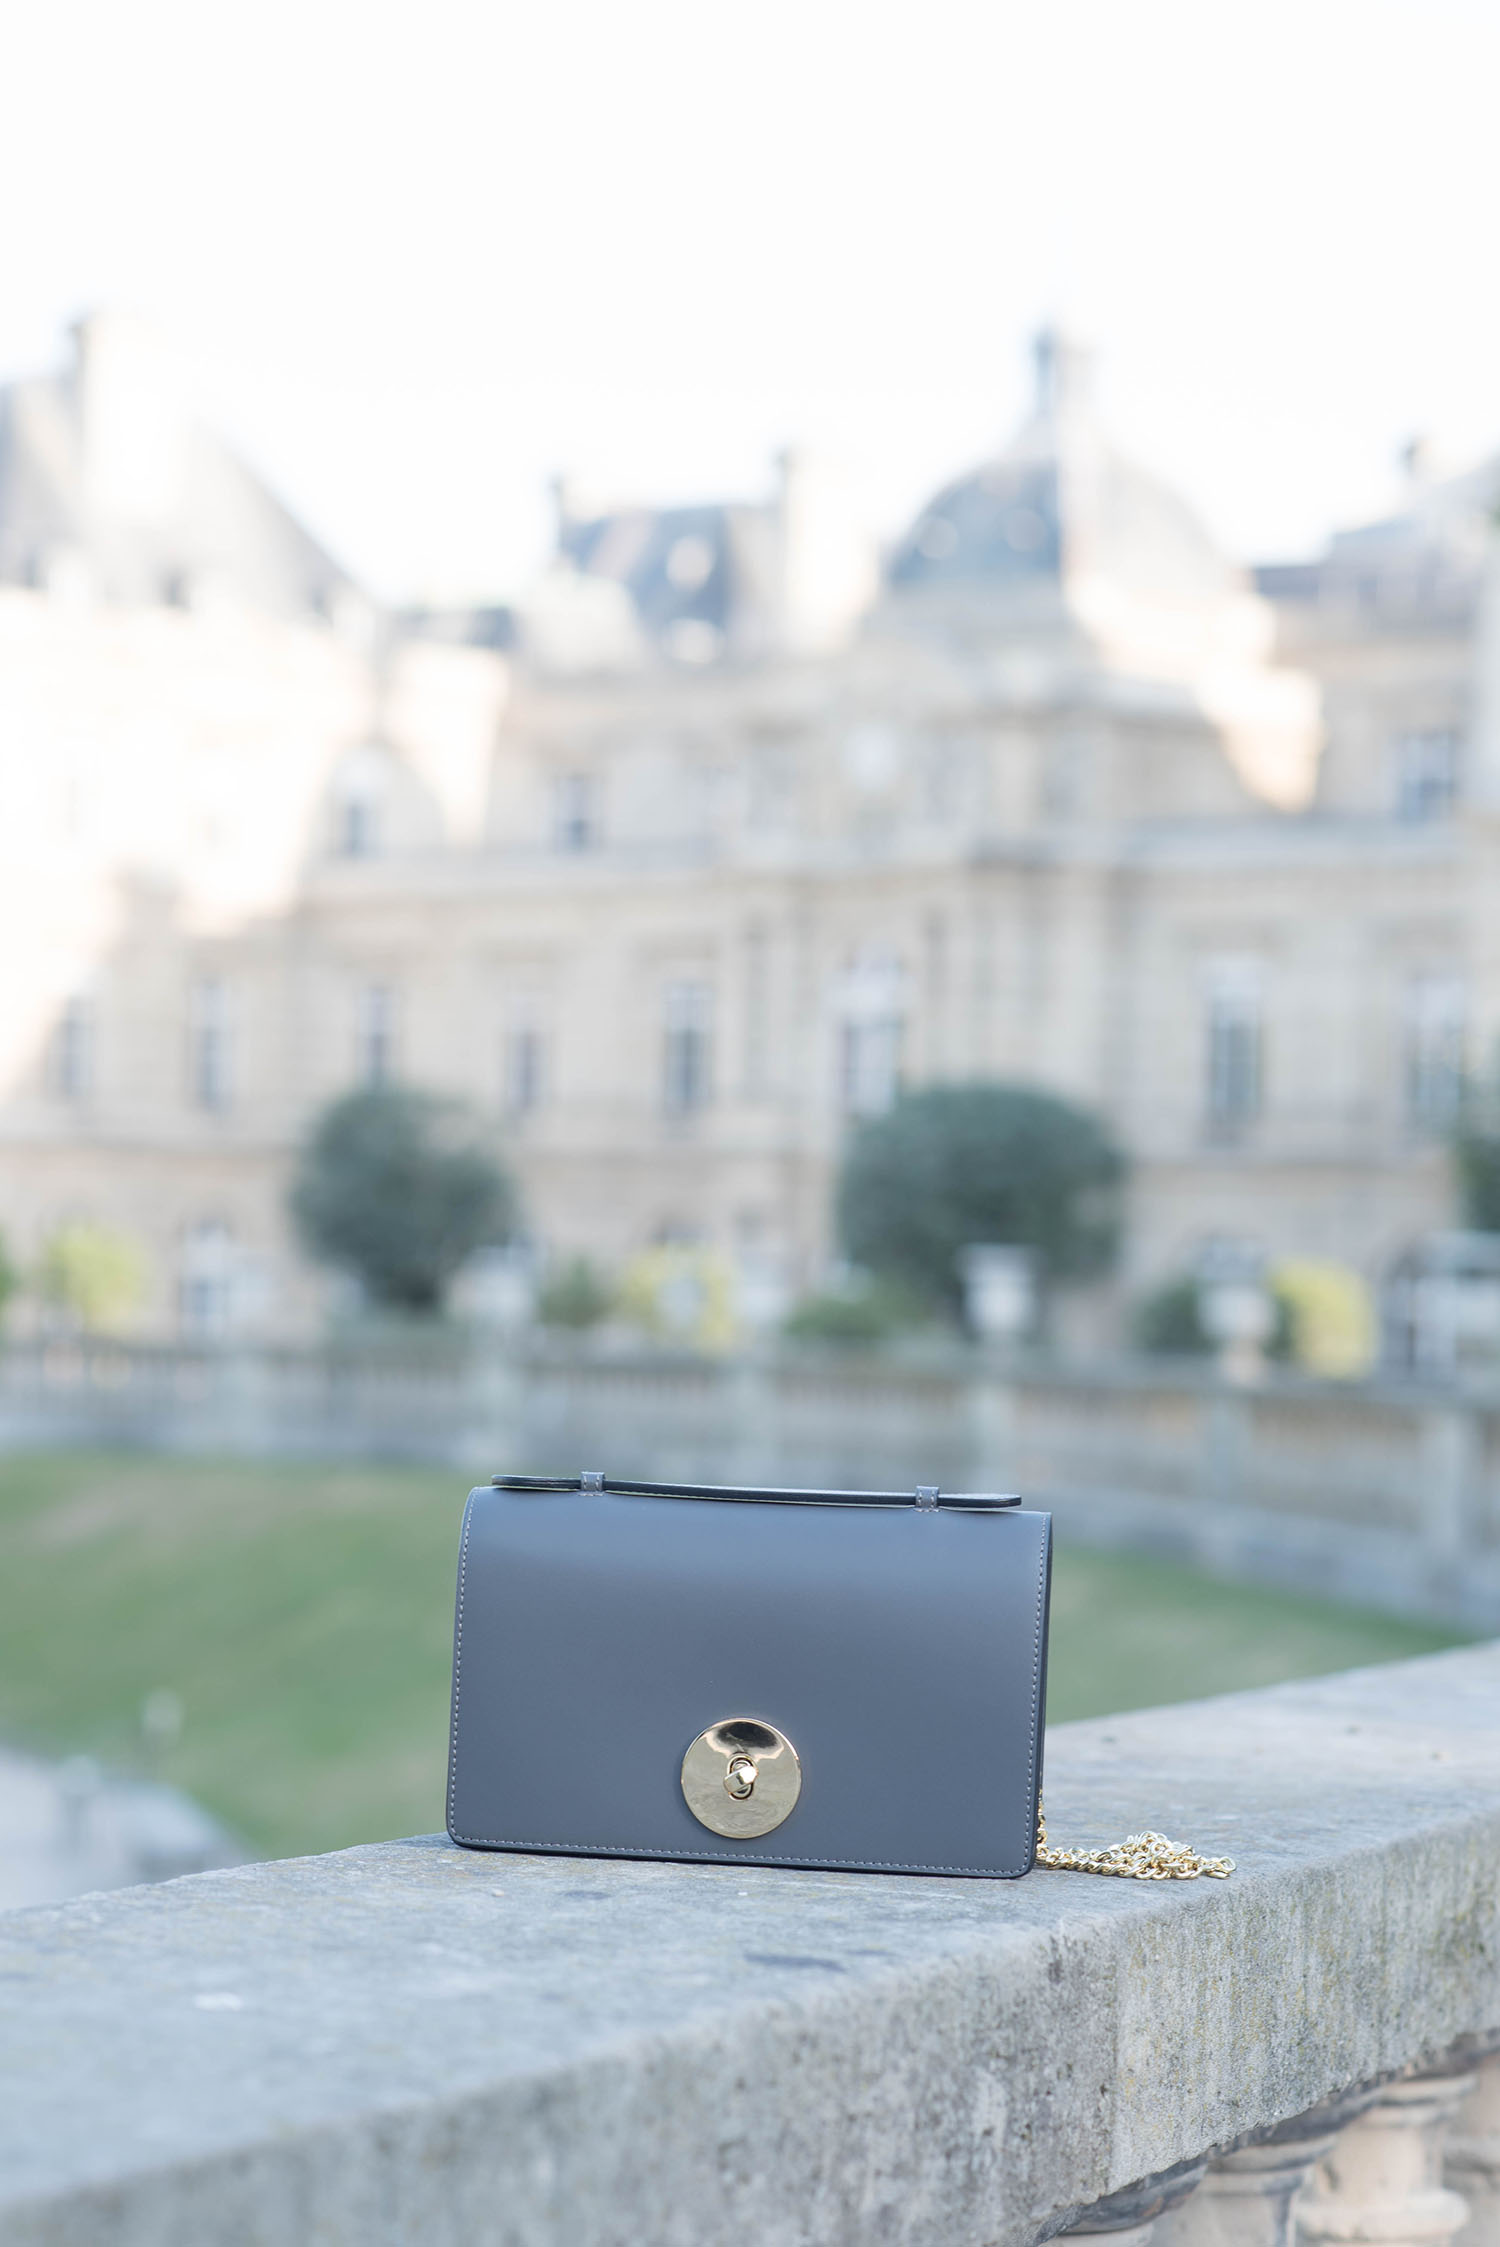 A grey leather Camelia Roma handbag sits on the fence in the Jardin du Luxembourg in Paris, as captured by Canadian fashion blogger Cee Fardoe of Coco & Vera